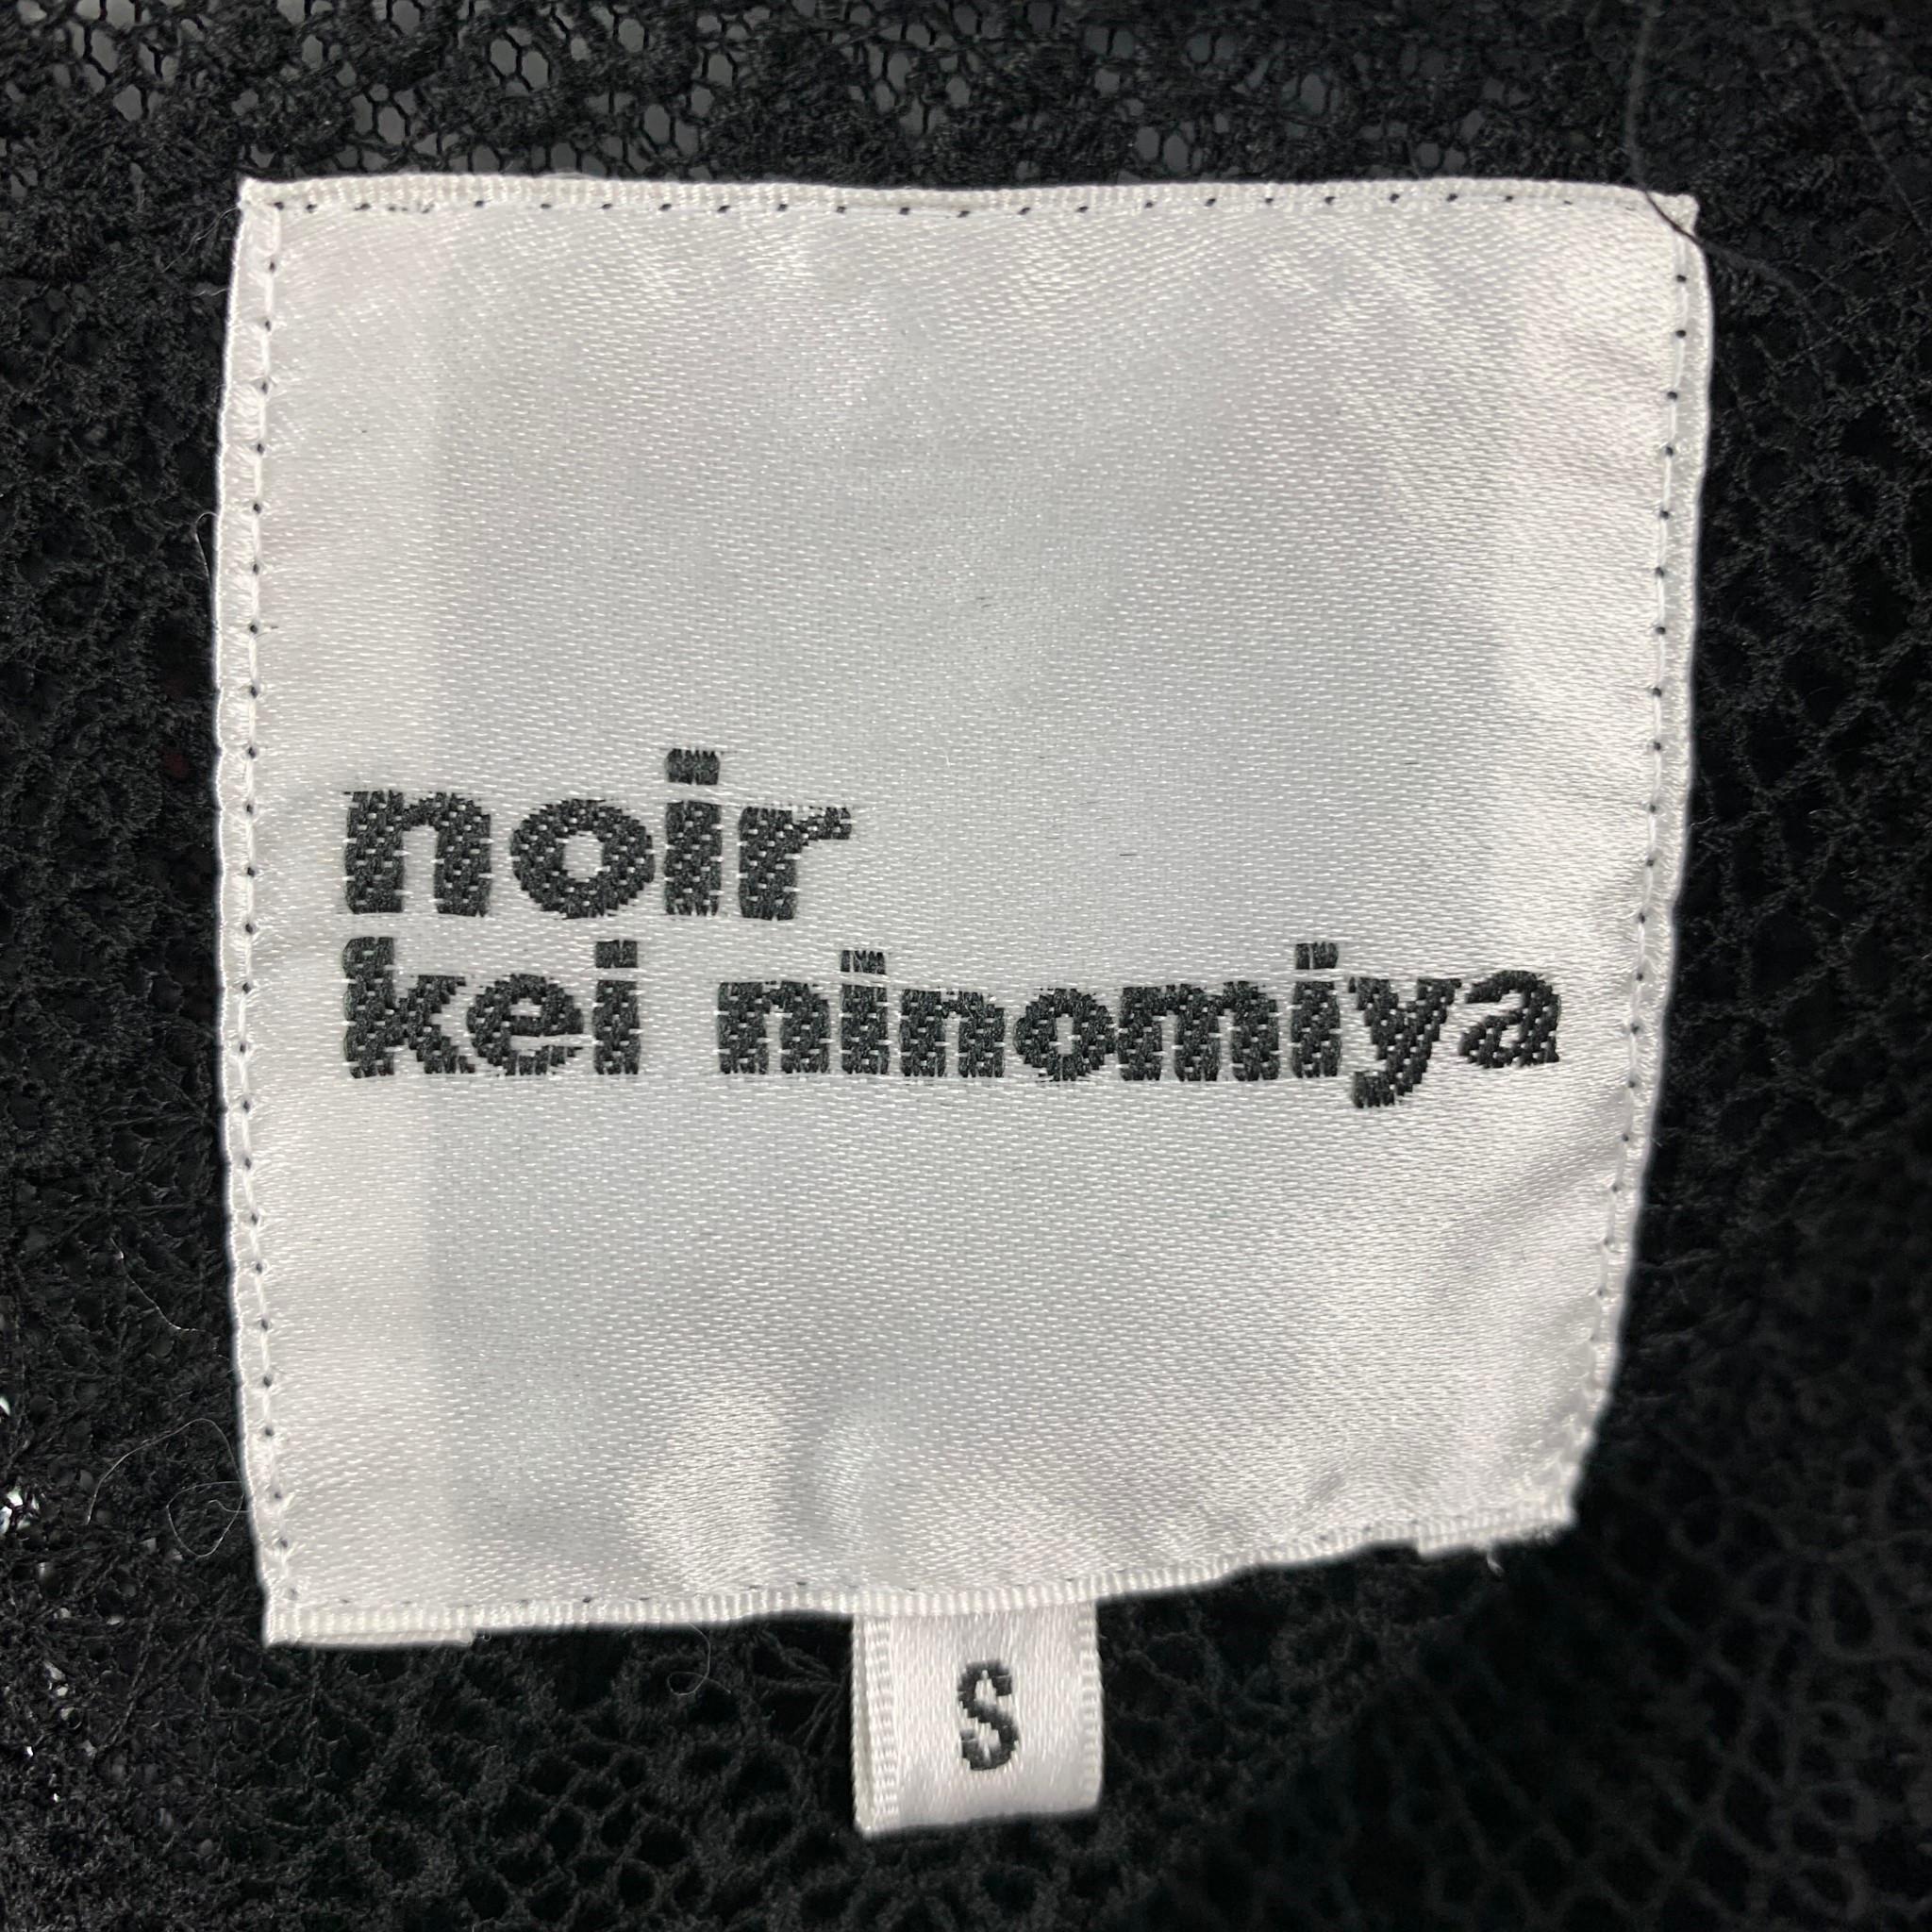 NOIR KEI NINOMIYA jacket comes in a black tulle see through material, lace trim, collarless, wide sleeves, leather trim, and a zip up closure. 

Very Good Pre-Owned Condition.
Marked: S

Measurements:

Shoulder: 15 in.
Bust: 36 in.
Sleeve: 24.5